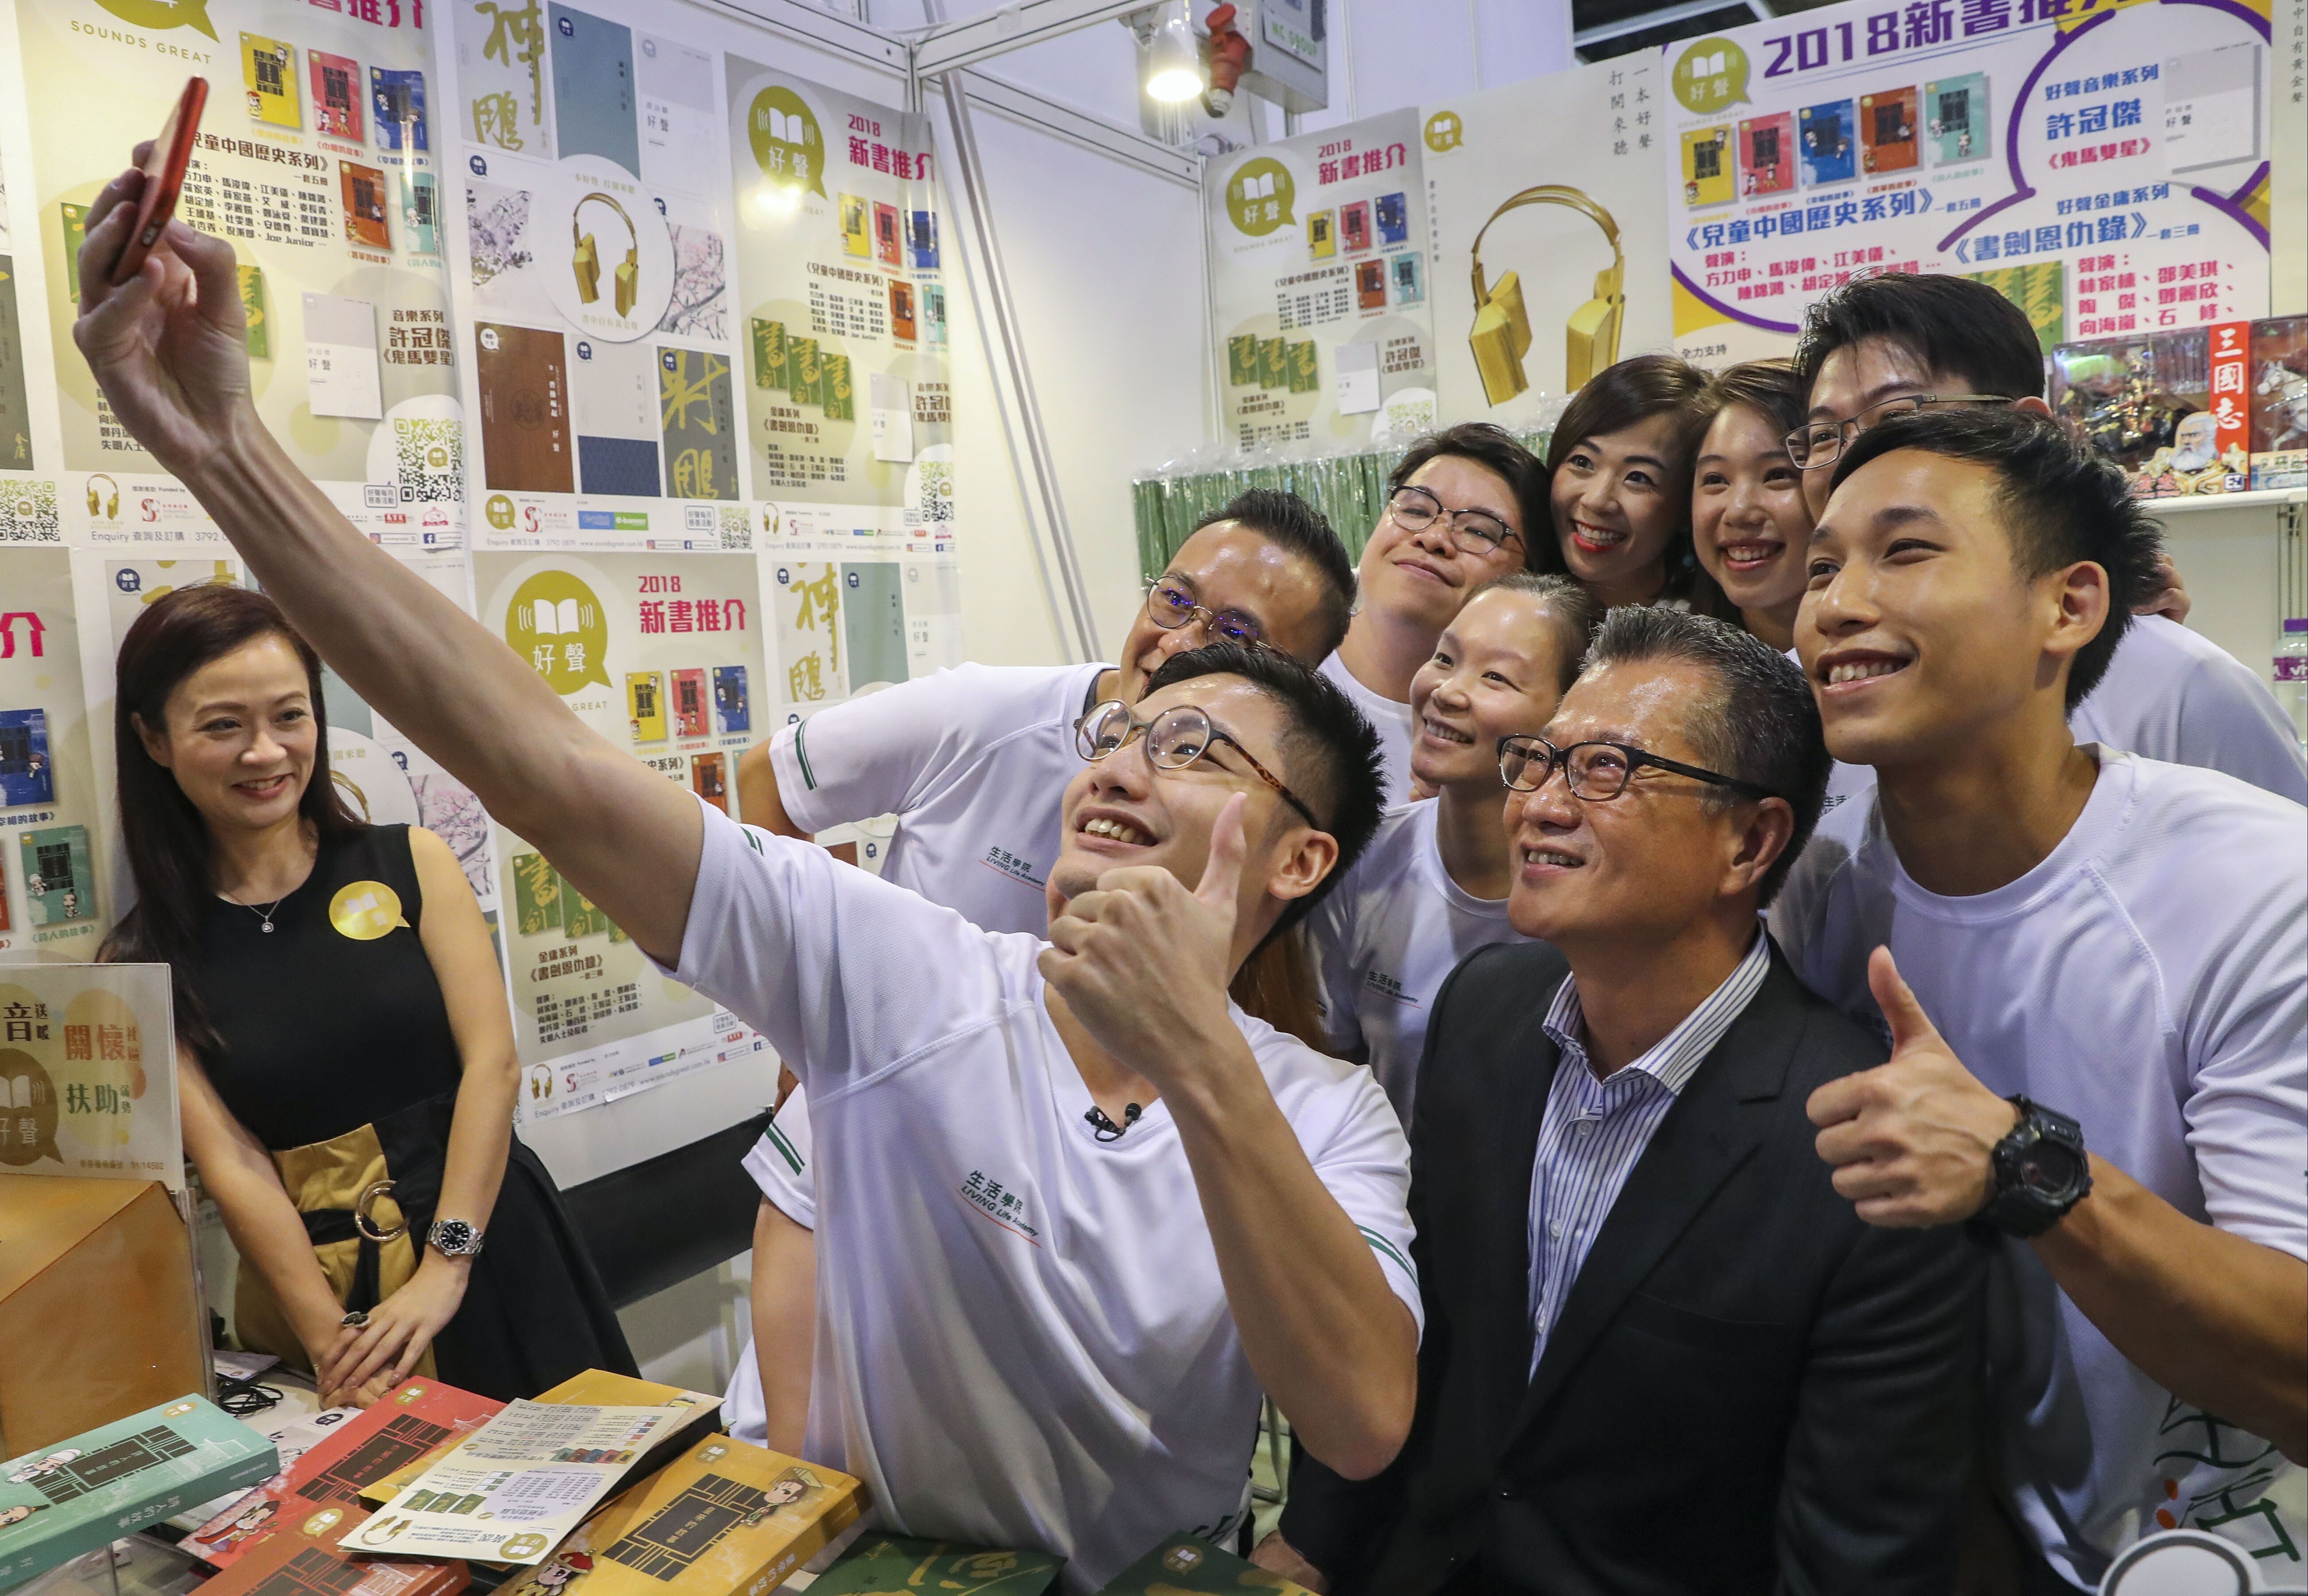 Financial Secretary Paul Chan (in black jacket) poses for a selfie with a group of admirers at the Hong Kong Book Fair. Photo: K. Y. Cheng